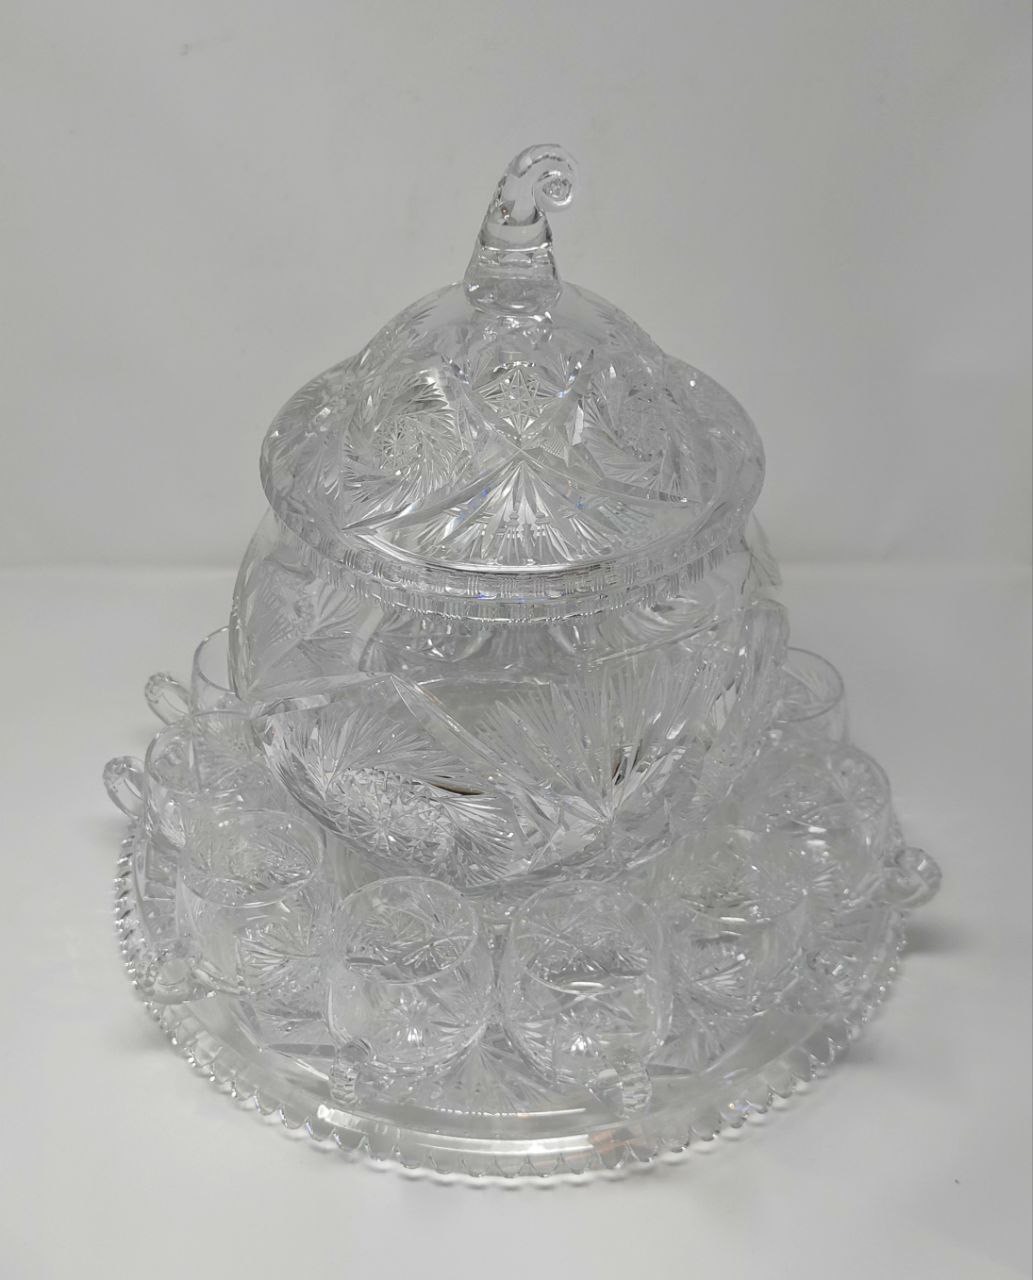 A complete set of hand cut crystal punch bowl